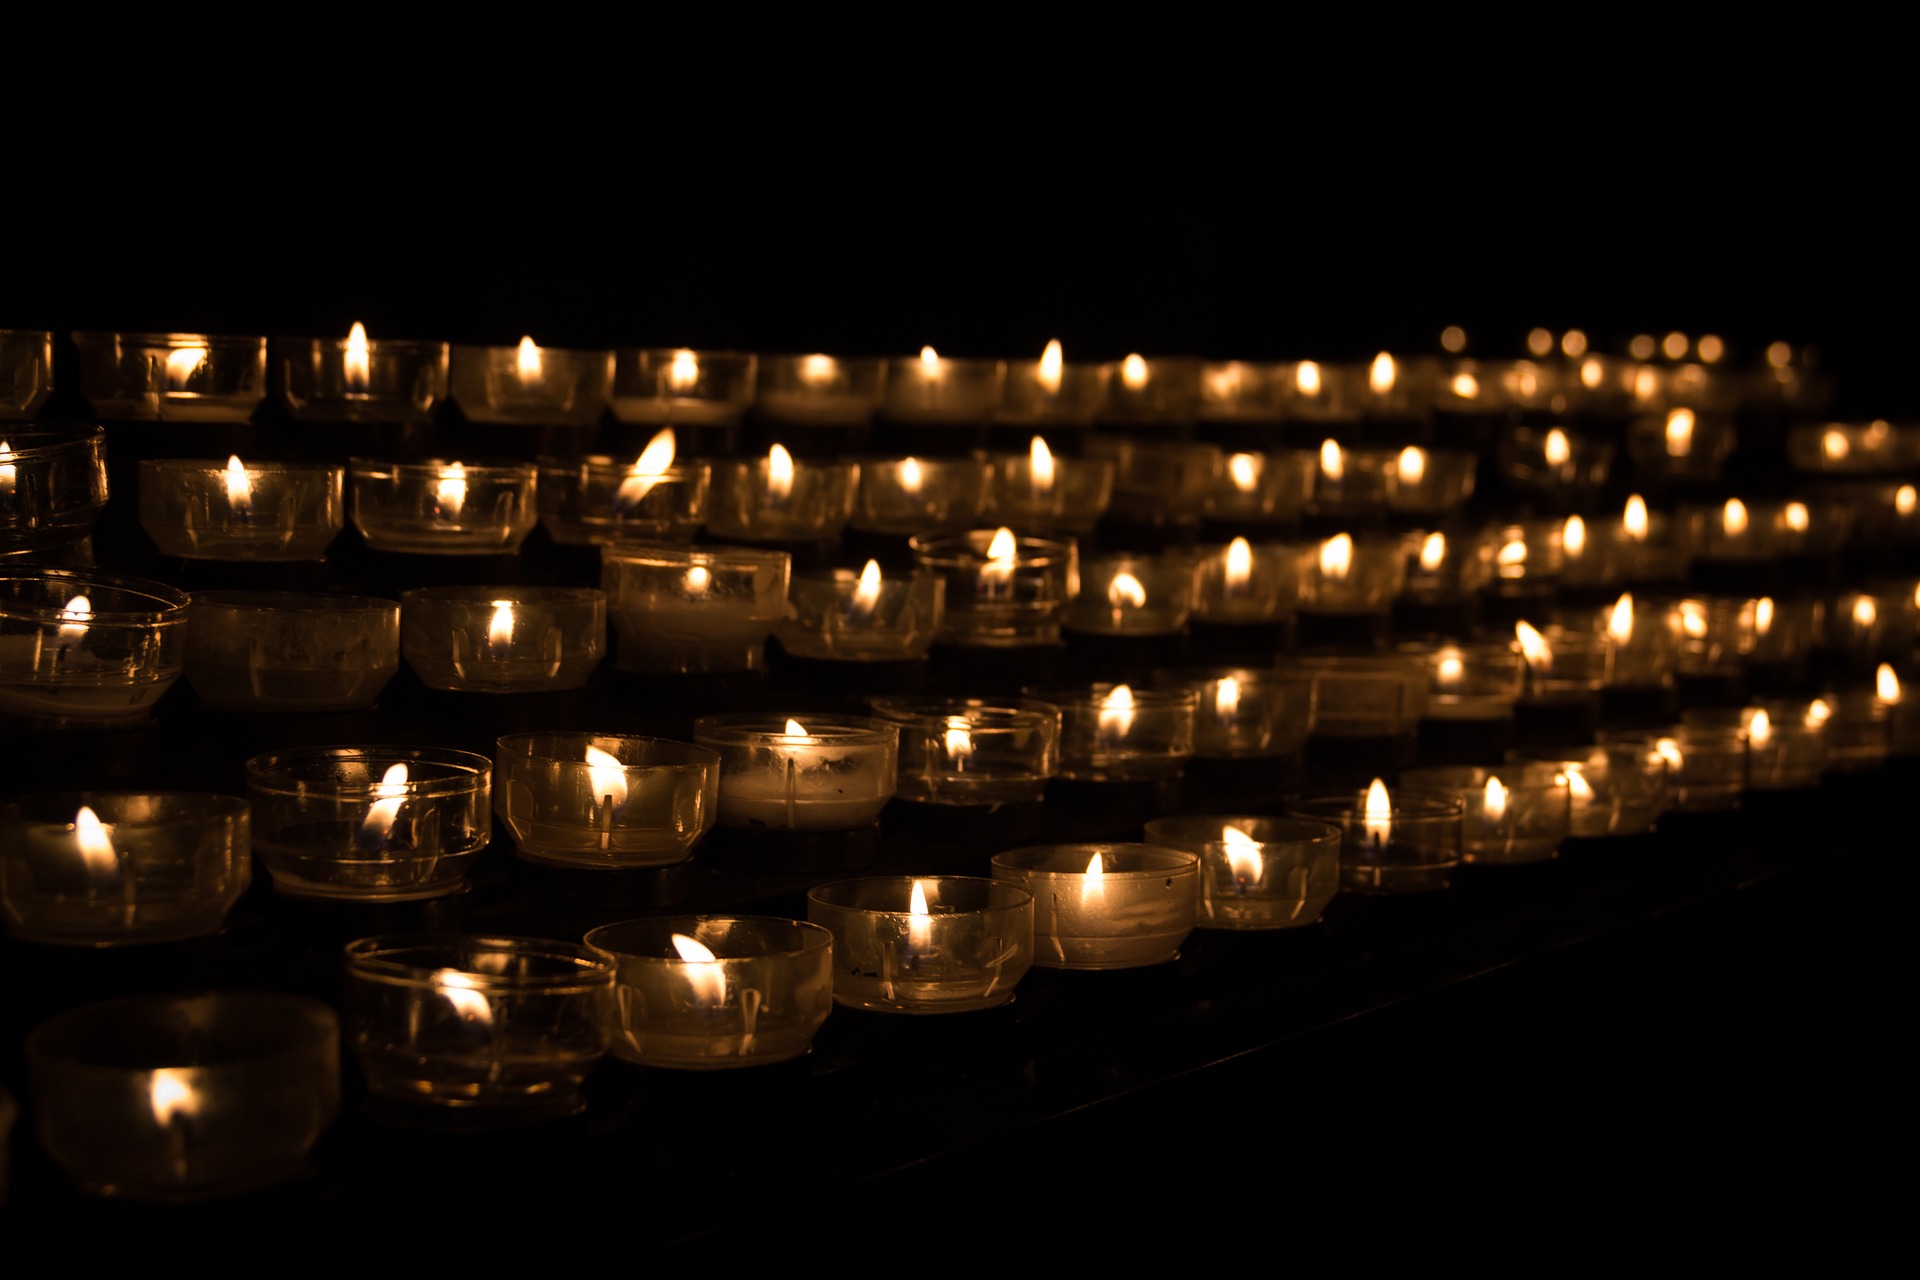 This image displays candles lit on a dark background.